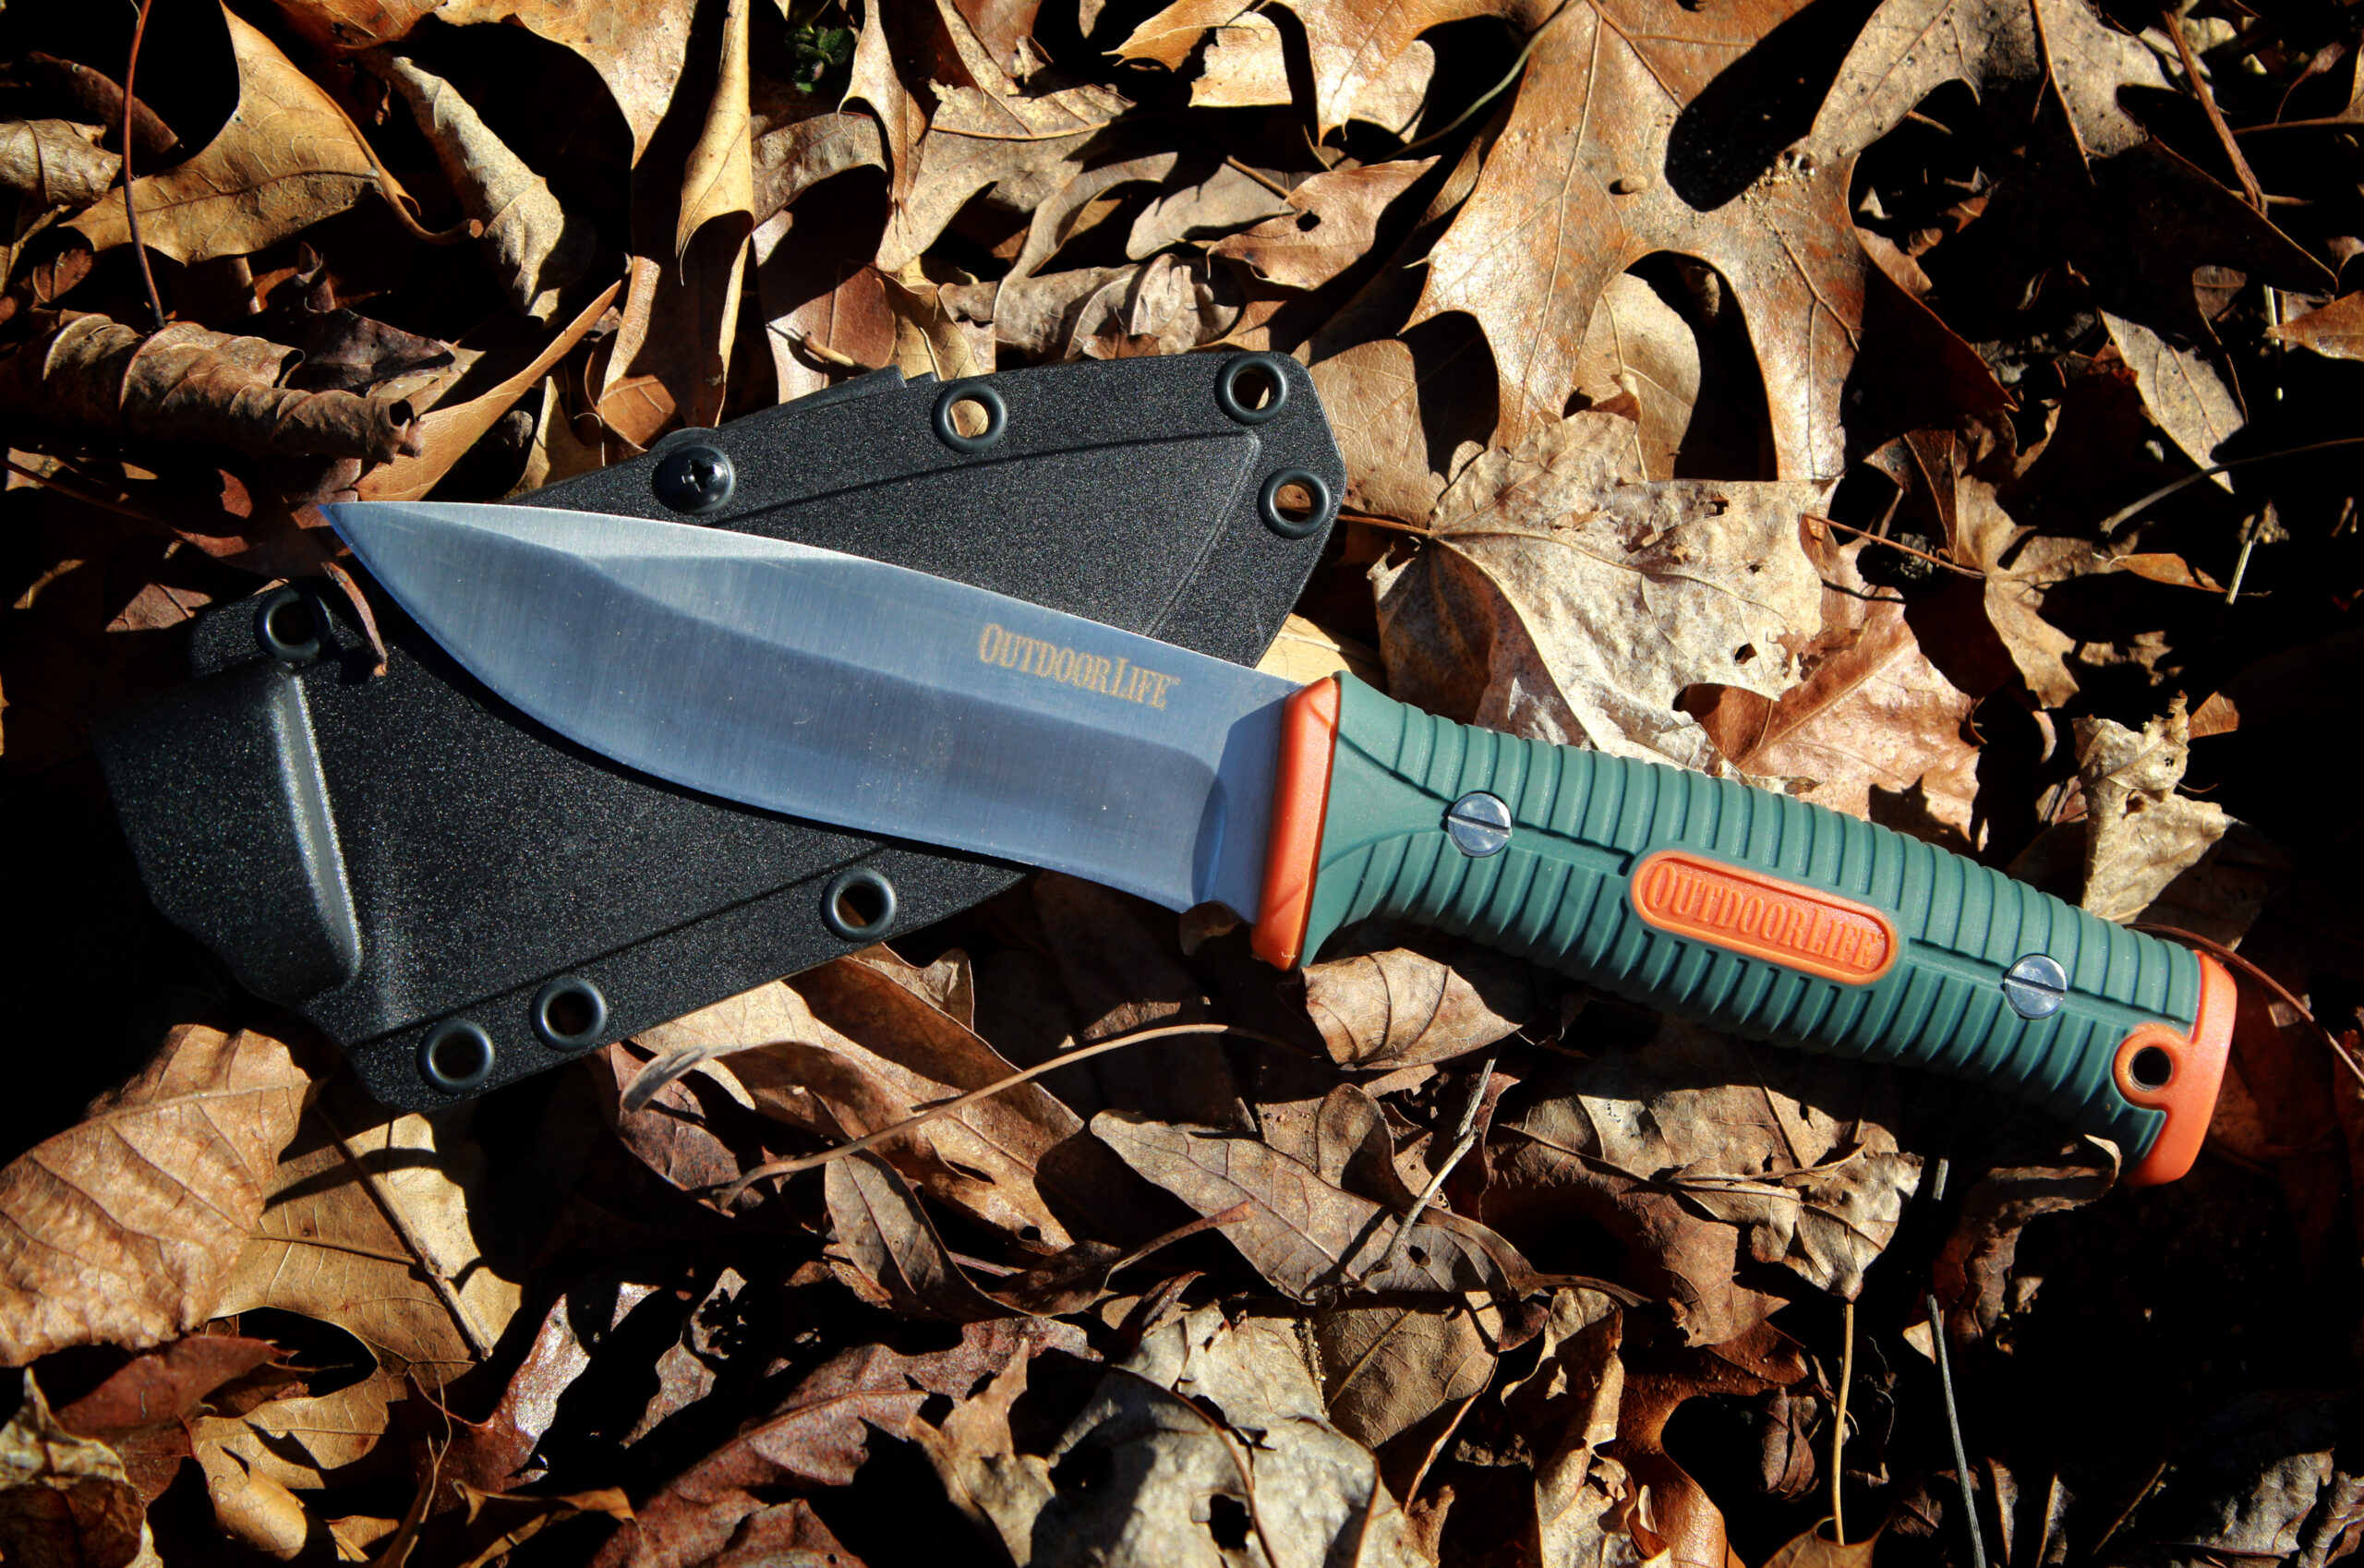 A fixed-blade camping and hunting knife by Outdoor Life.